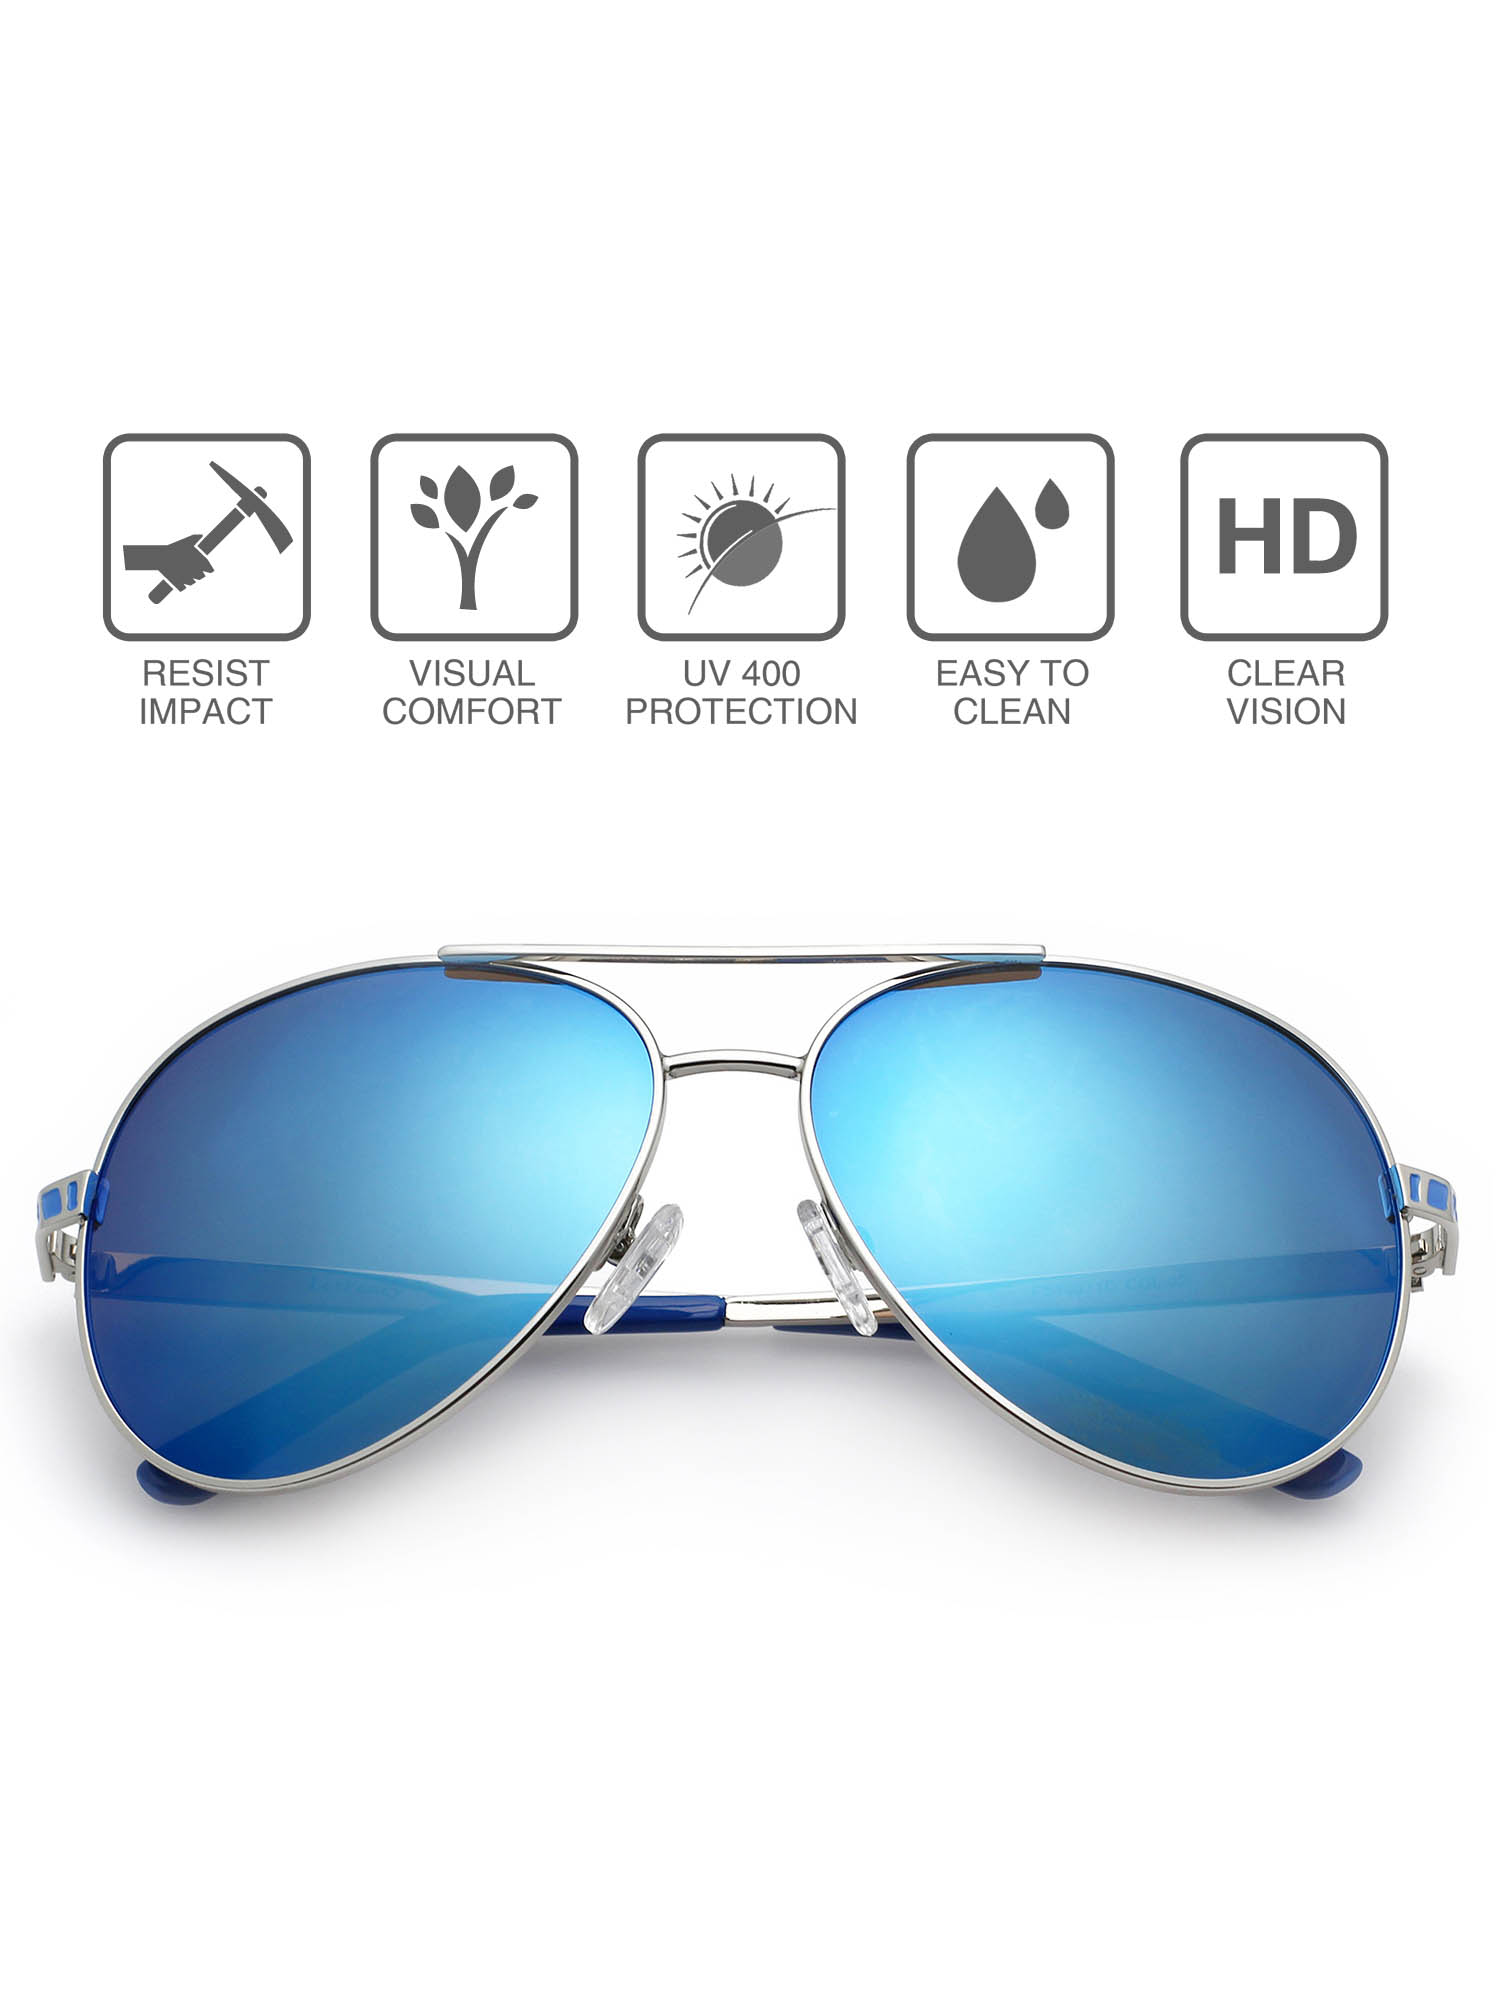 Aviator Sunglasses for Women with Case, Blue Mirrored, 61mm - image 7 of 10